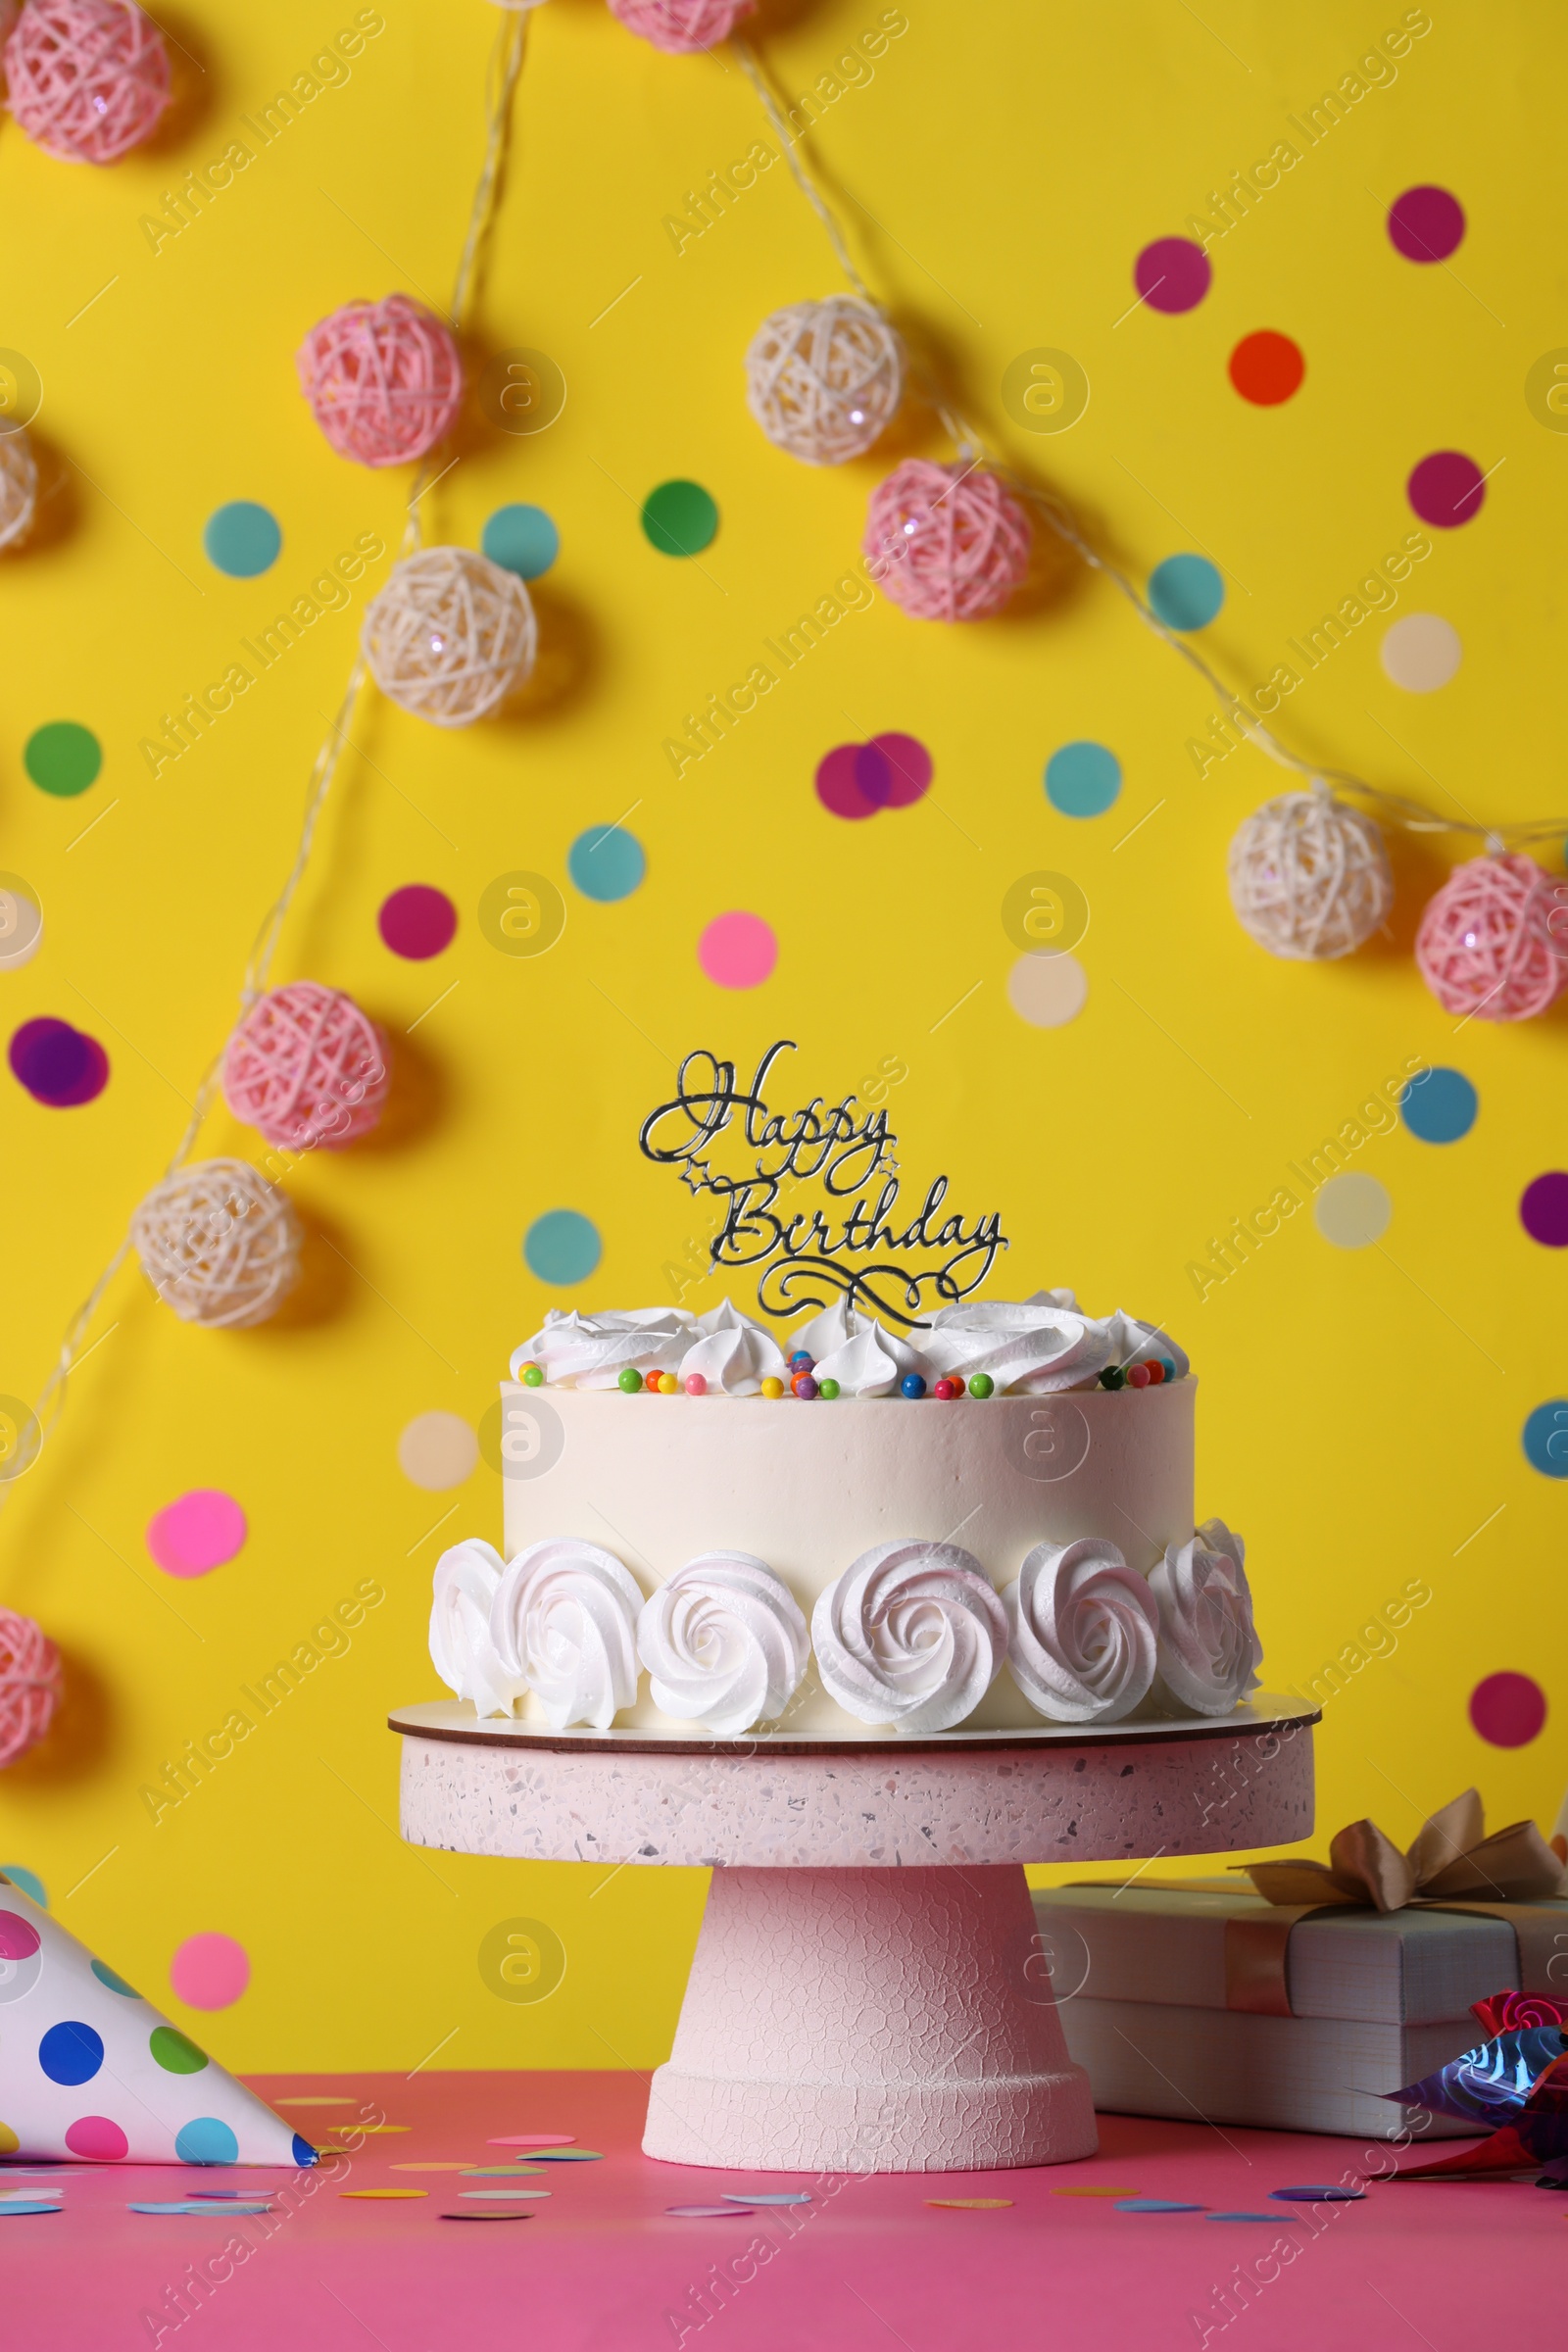 Photo of Beautiful birthday cake and decor on pink table